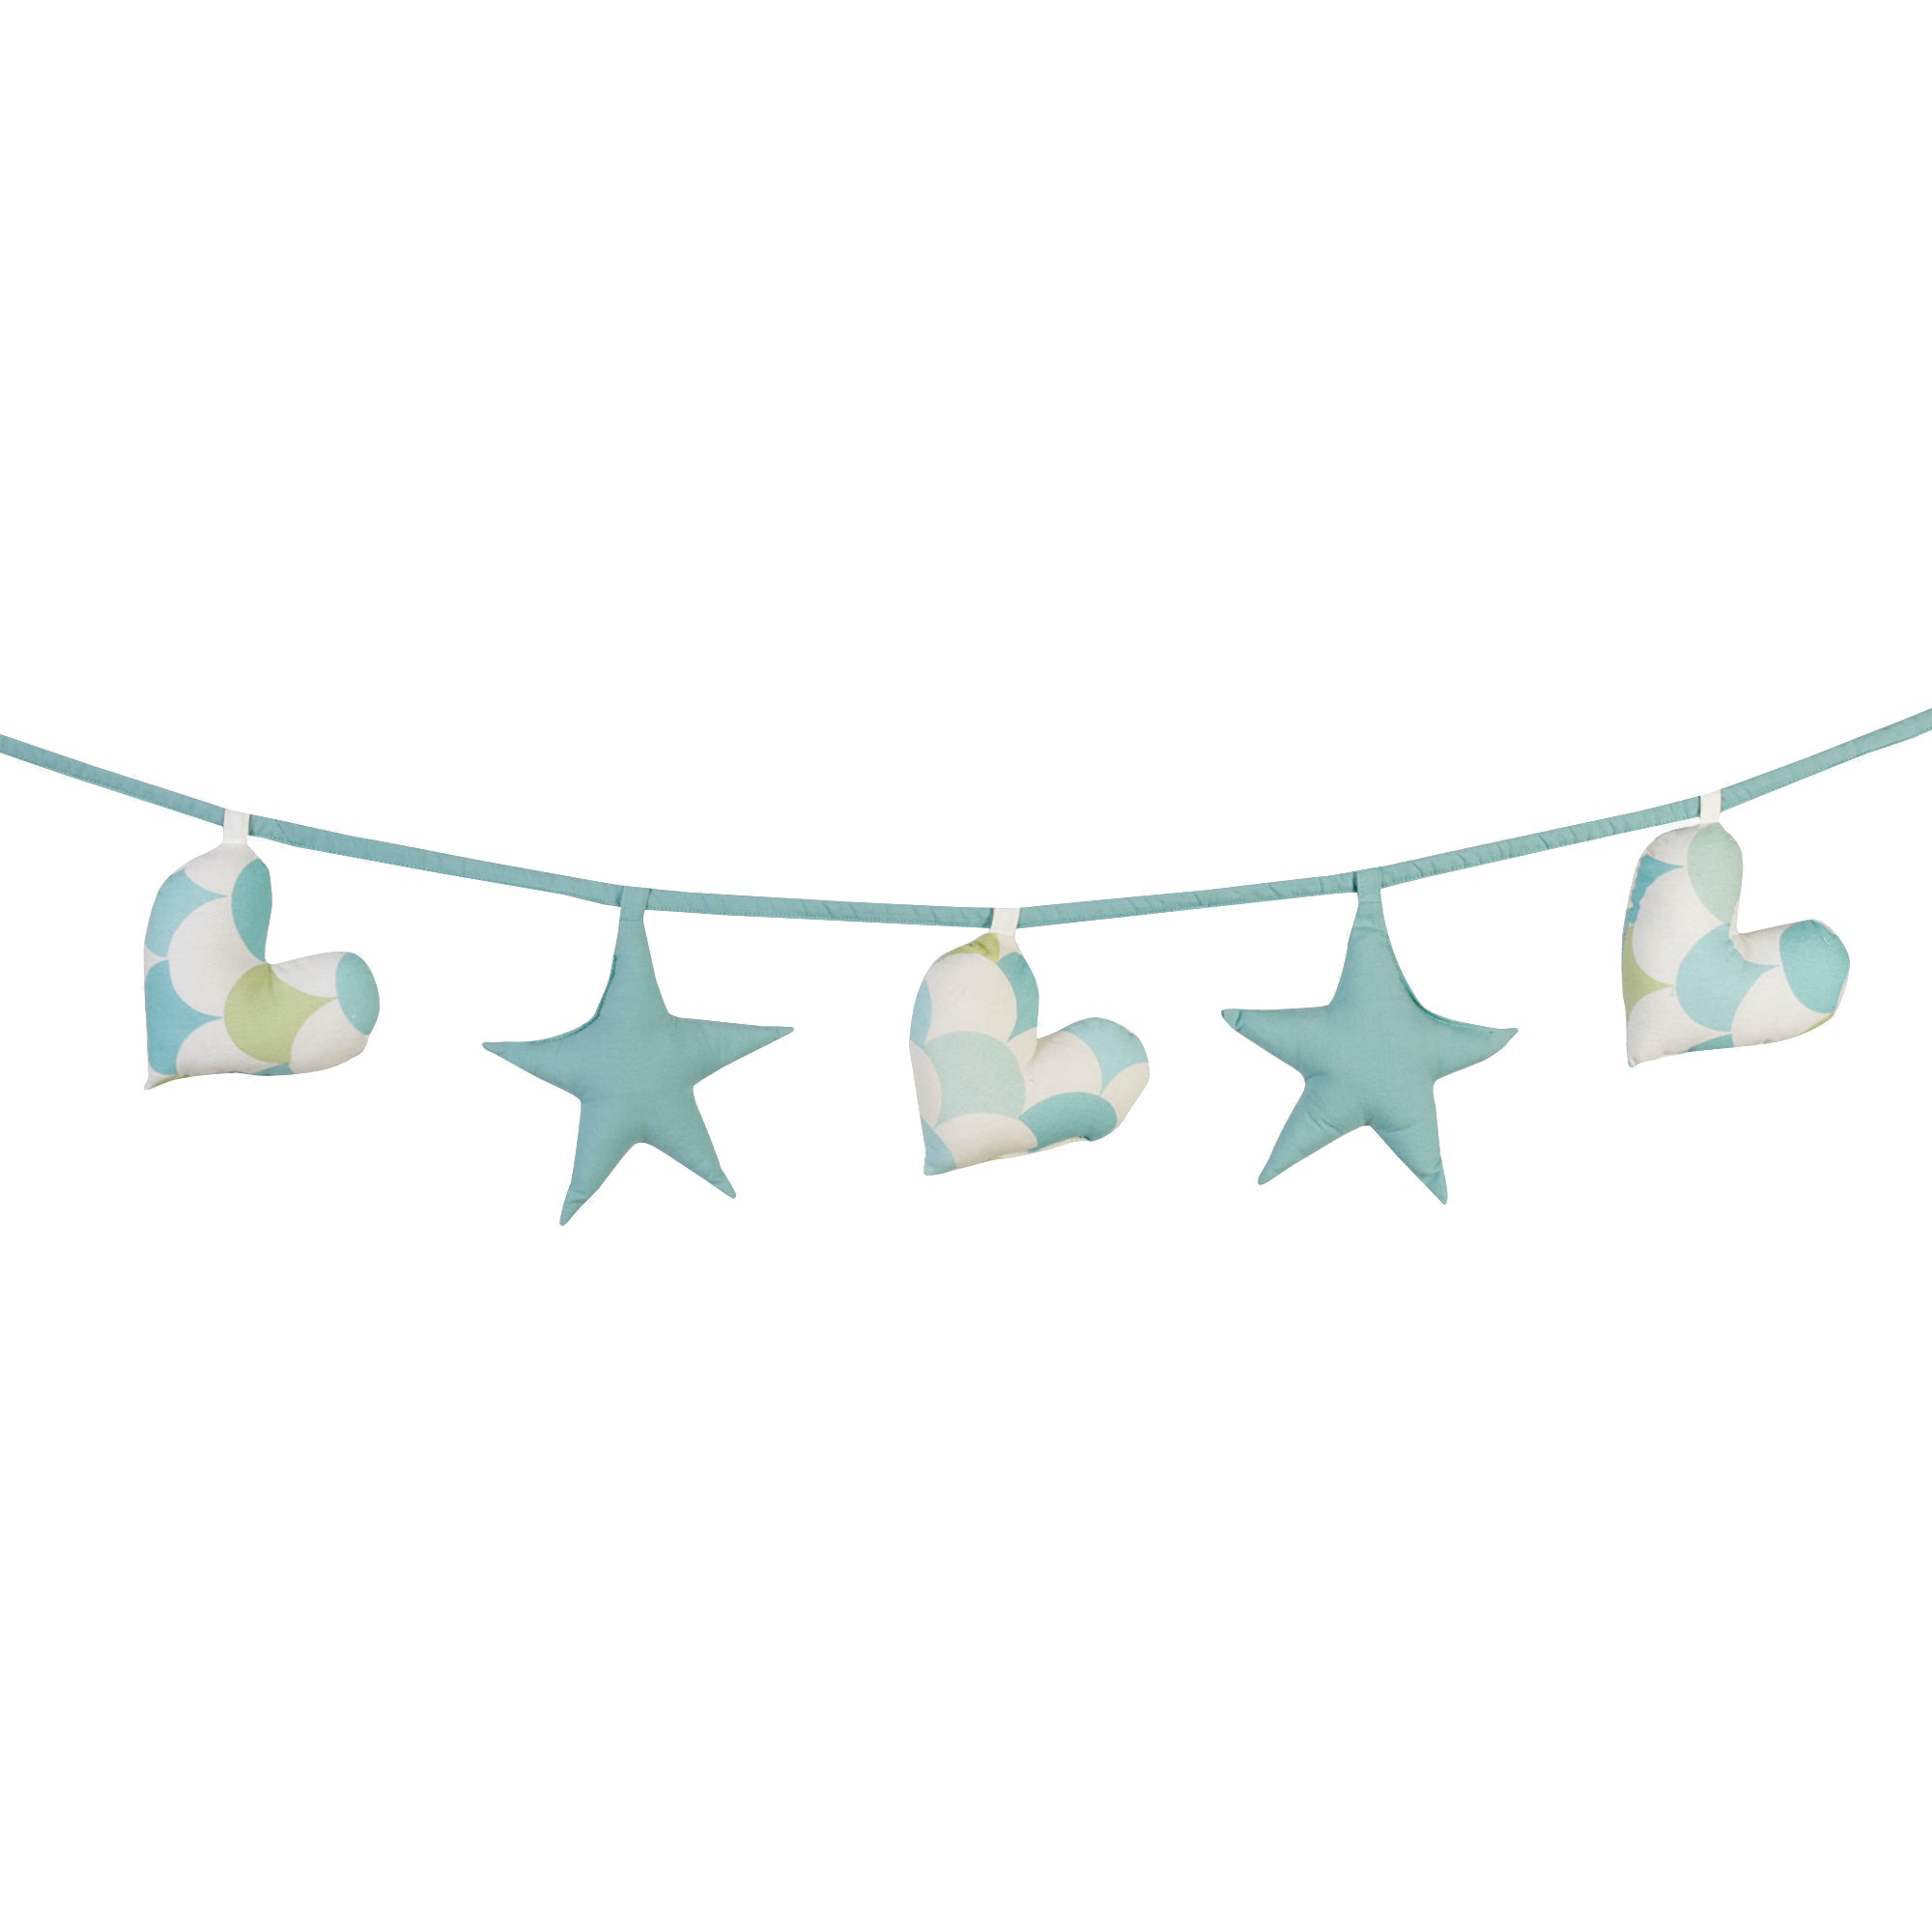 CANTON LIME HEART AND STAR BUNTING